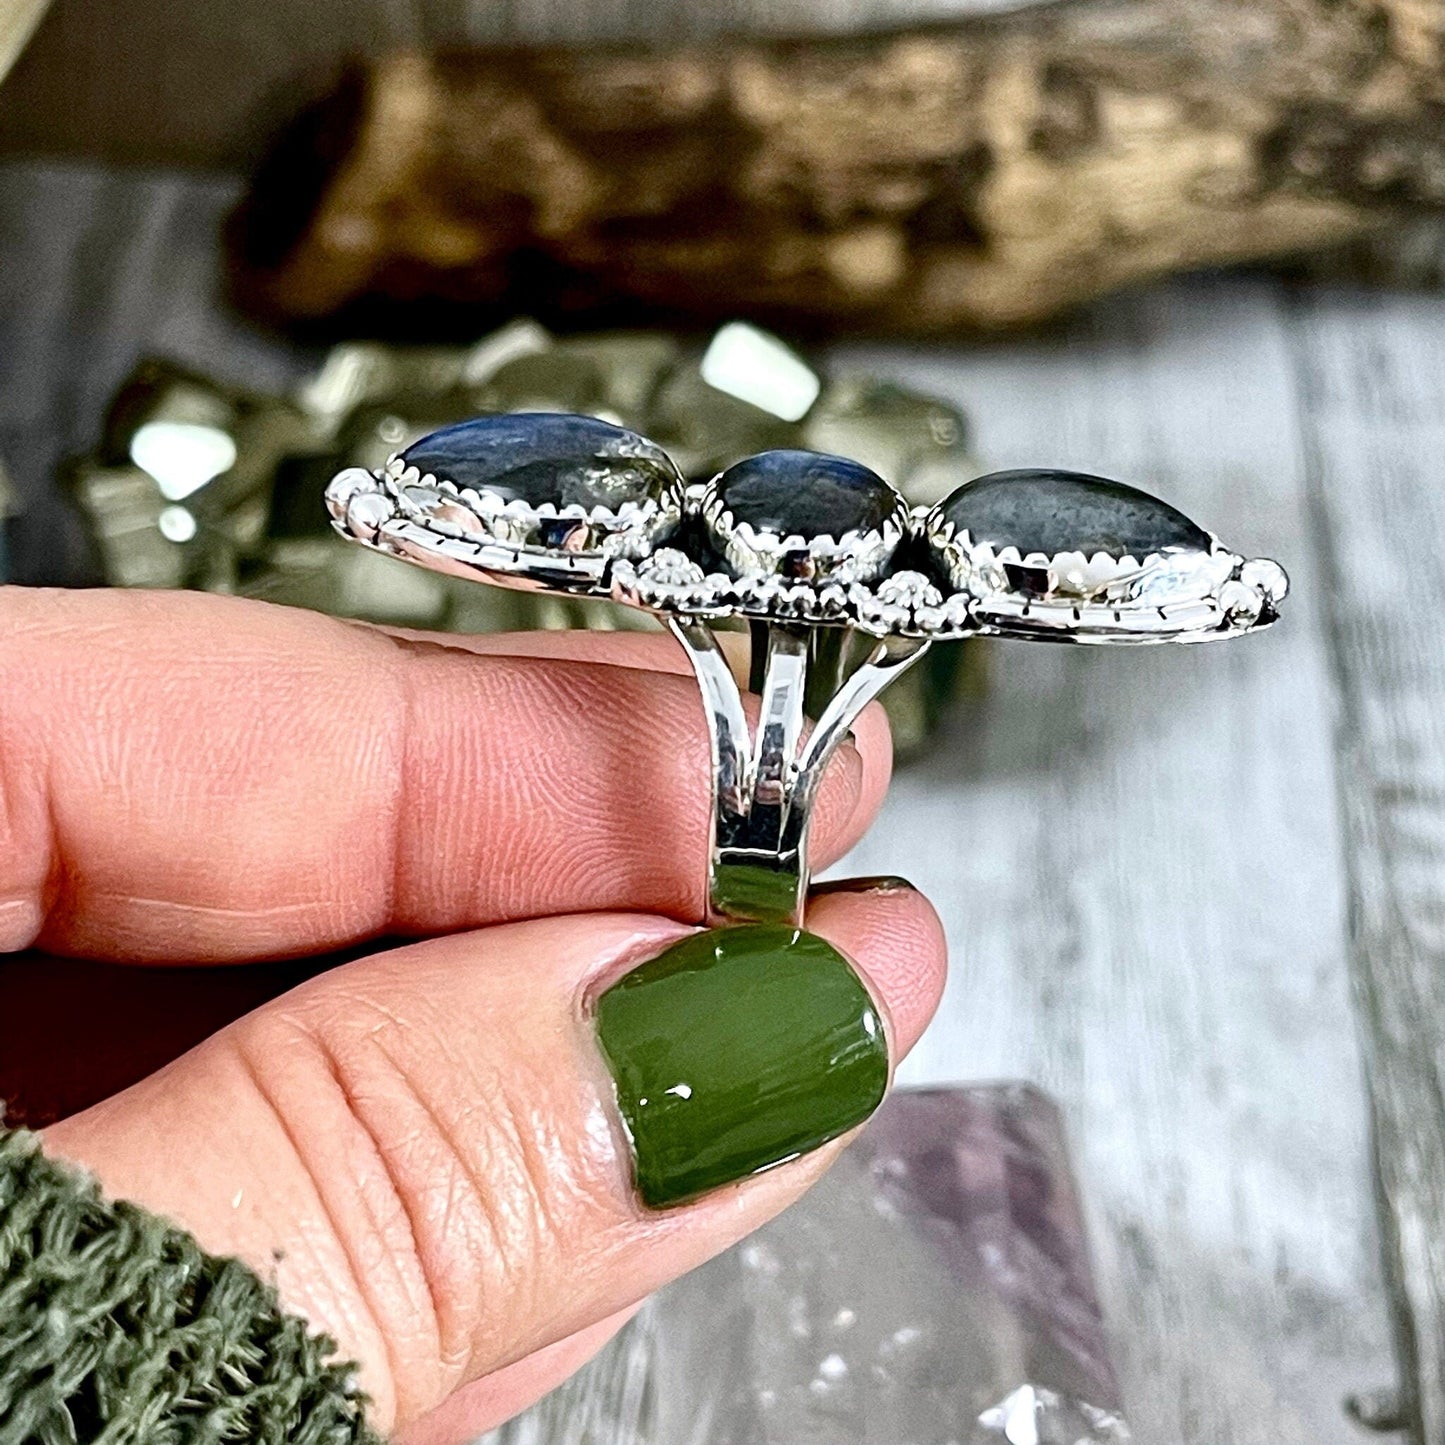 Three Stone Labradorite Ring in Sterling Silver / Designed by FOXLARK Collection Size 5 6 7 8 9 10 11 - Foxlark Crystal Jewelry